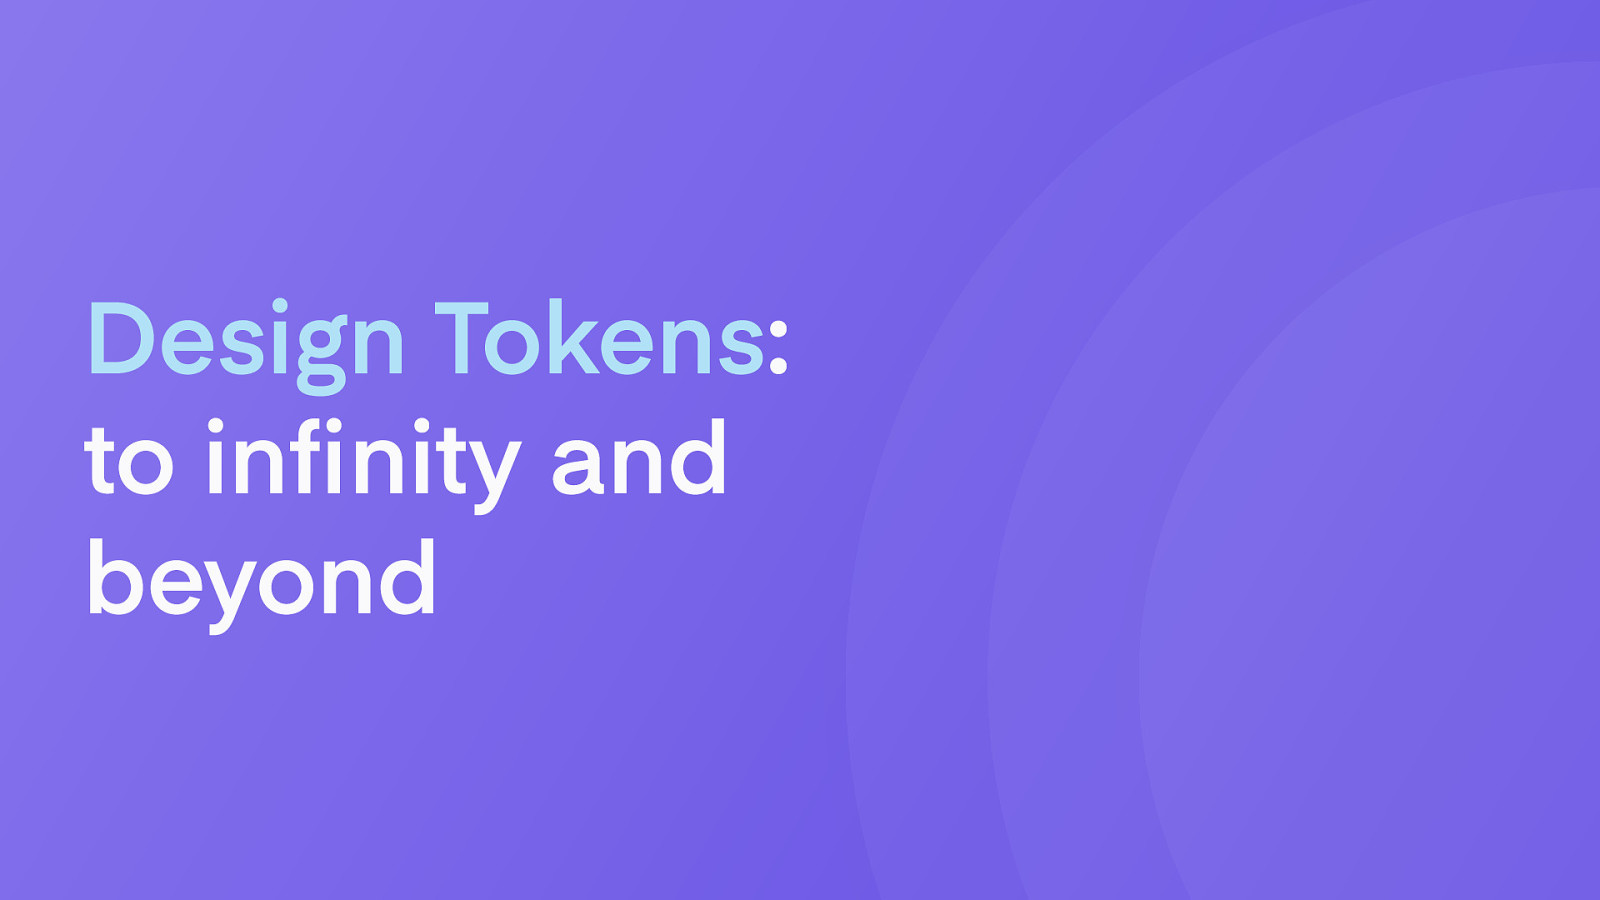 Design Tokens: To Infinity and Beyond